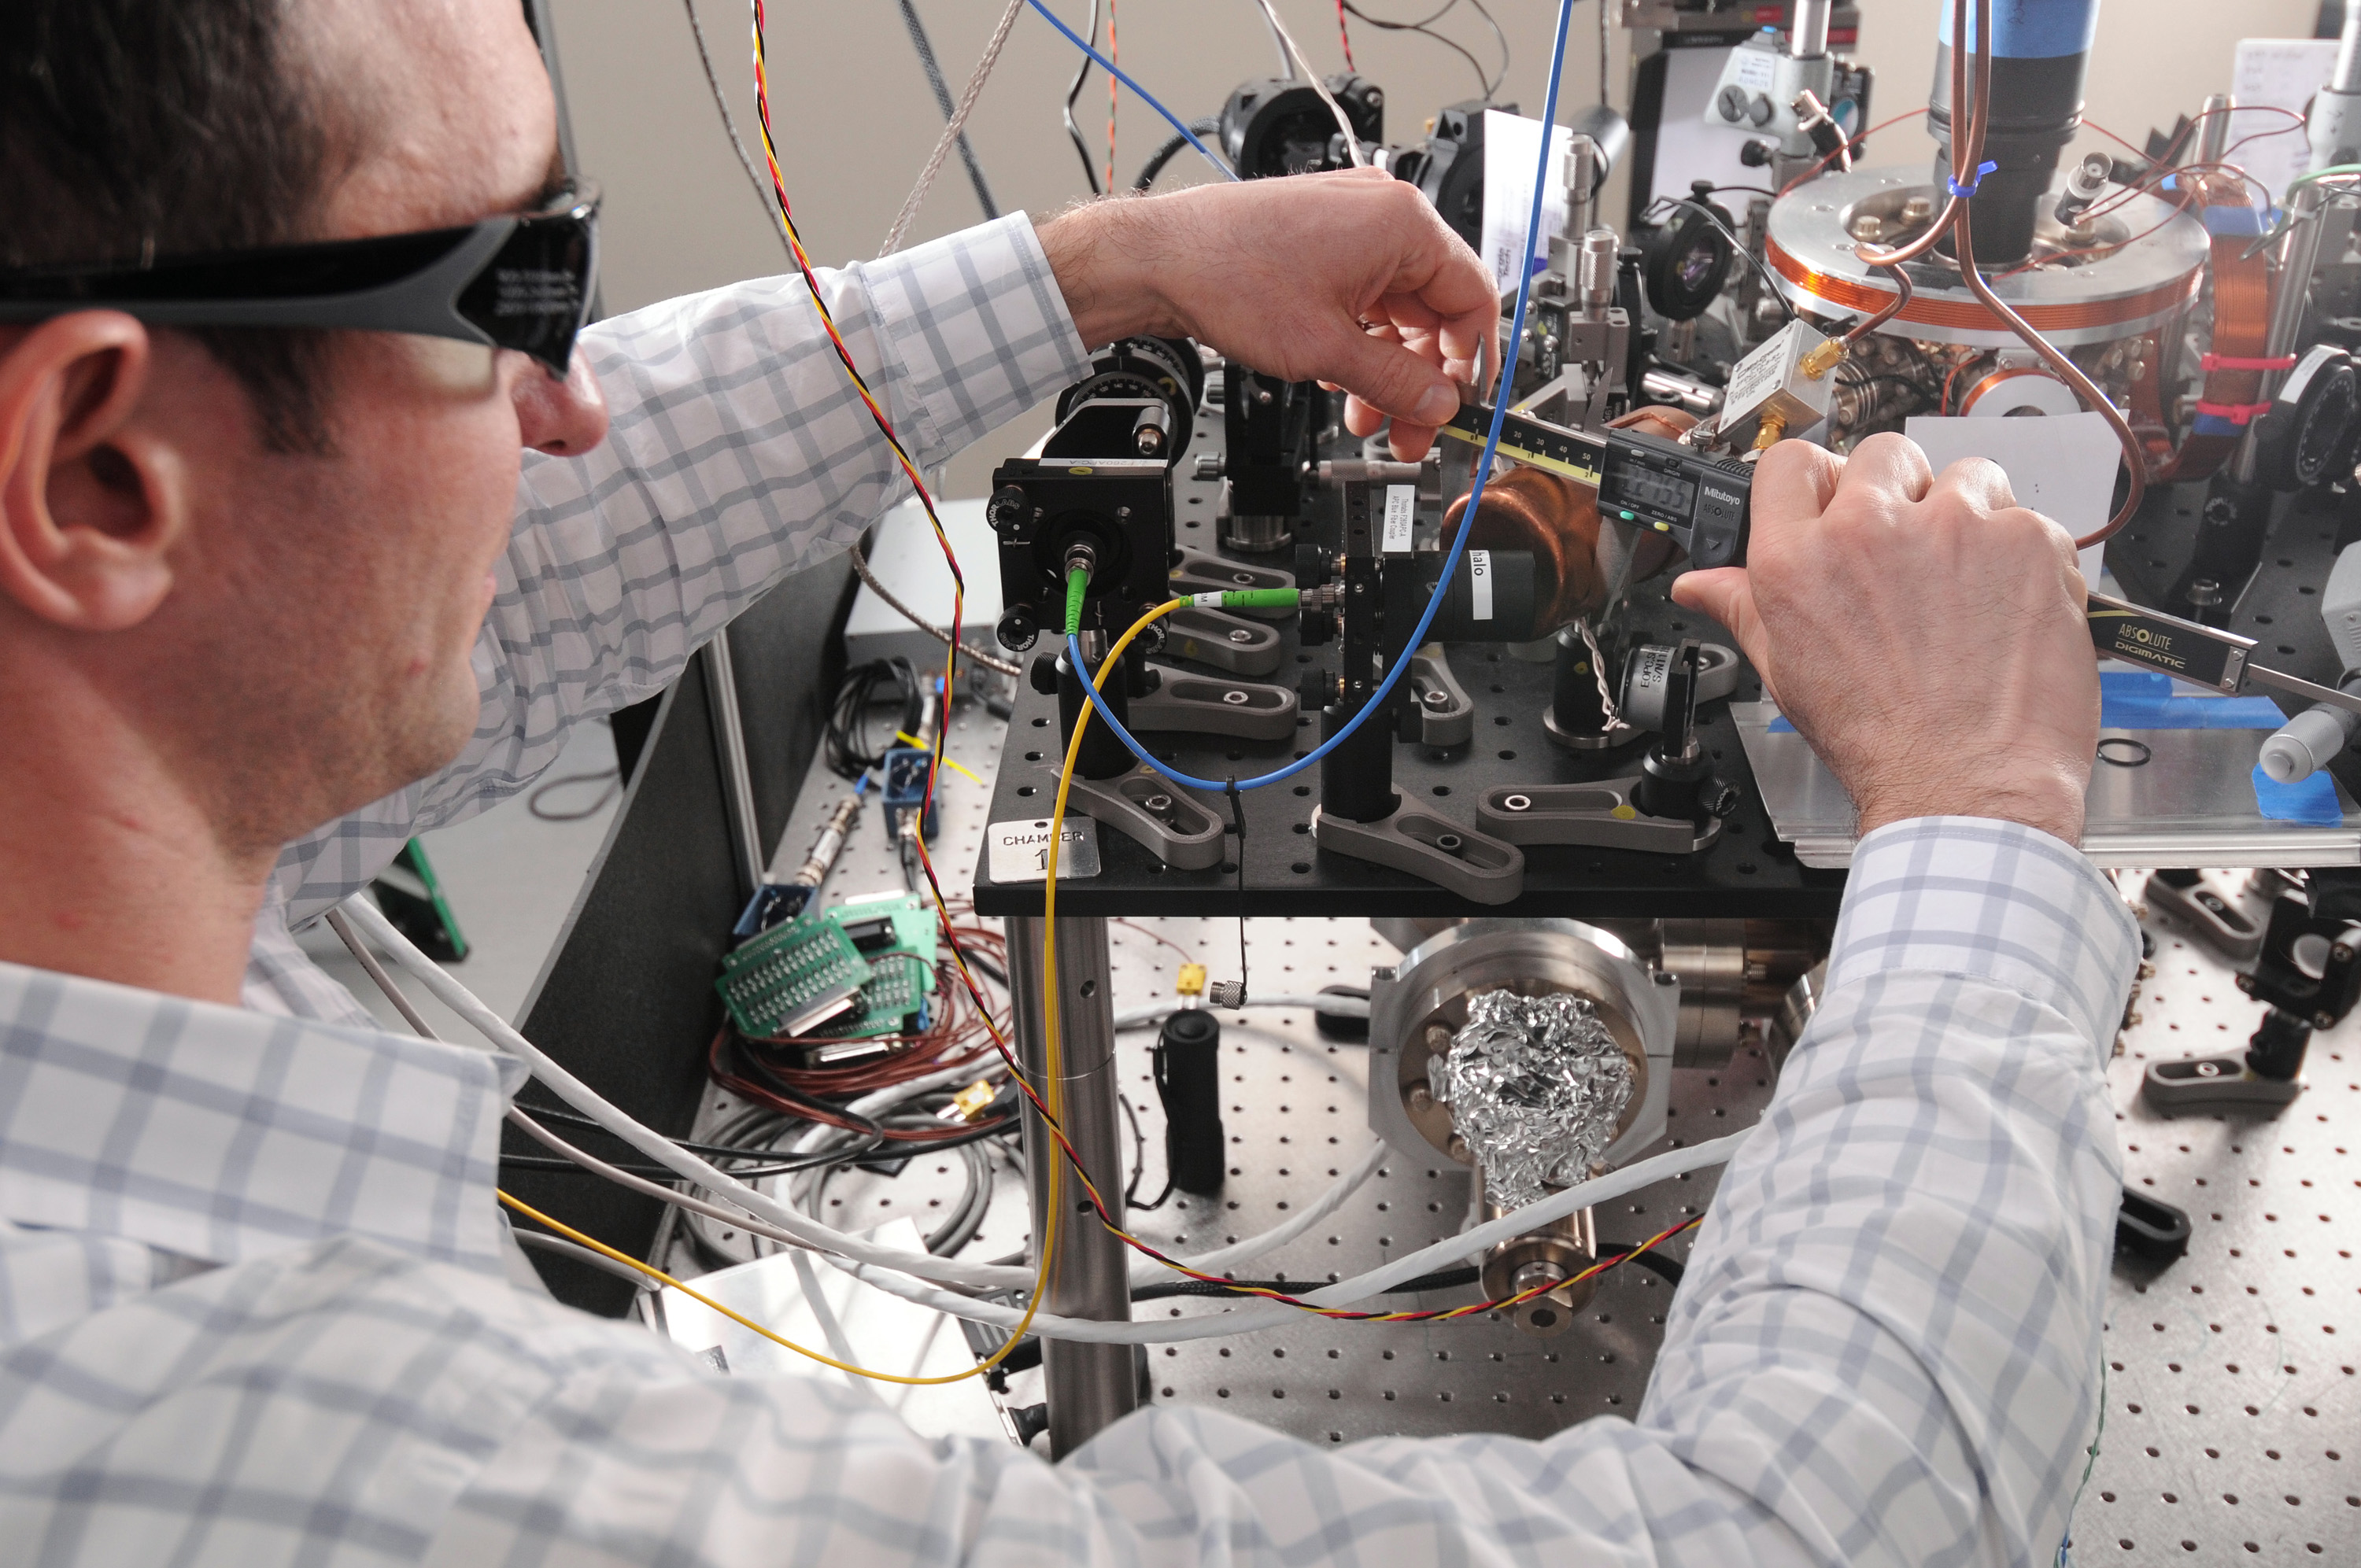 Researcher Kenton Brown adjusts optical components in an experimental setup within GTRI’s Quantum Information Systems Branch. (Credit: Gary Meek)